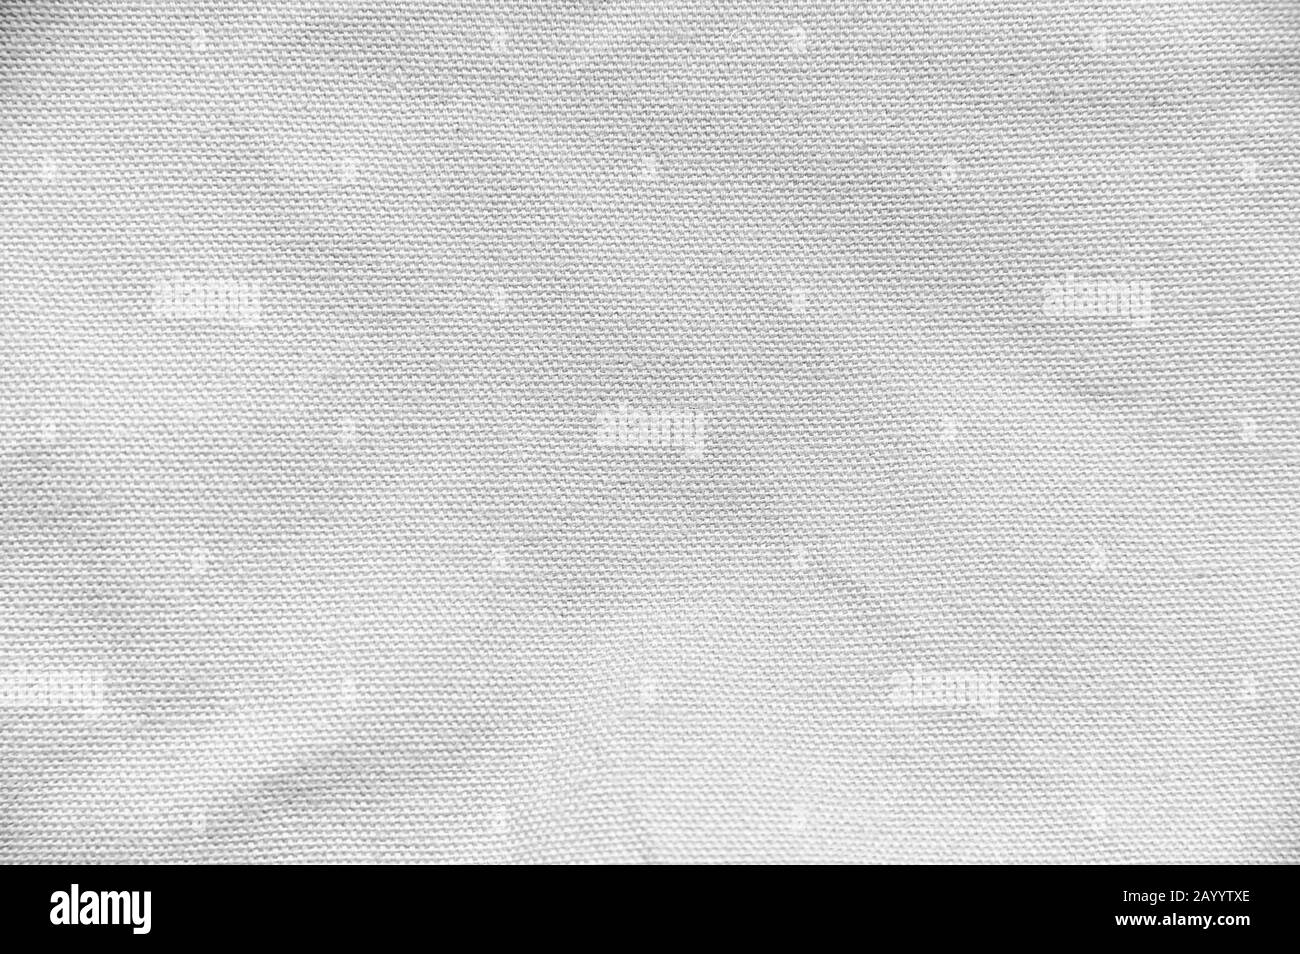 Fabric Texture Black And White Stock Photos Images Alamy